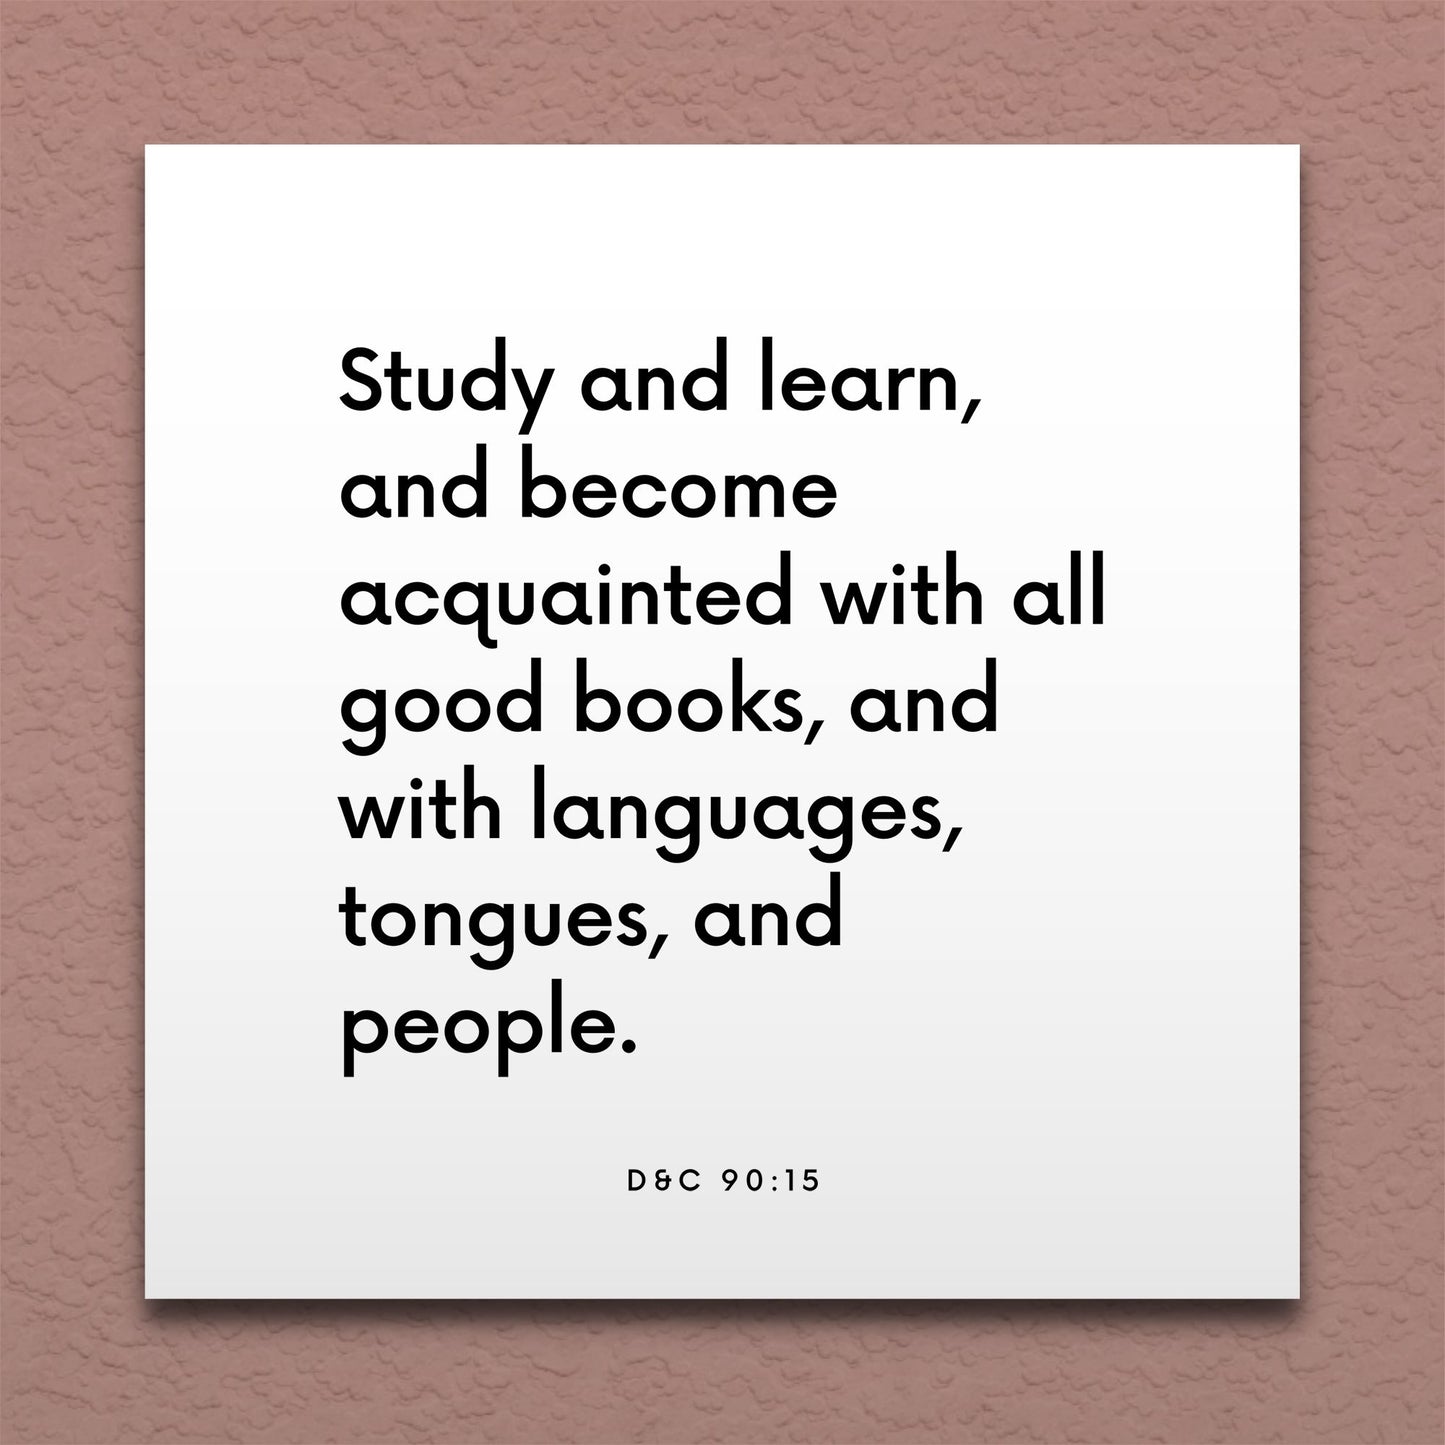 Wall-mounted scripture tile for D&C 90:15 - "Study and learn, and become acquainted with all good books"